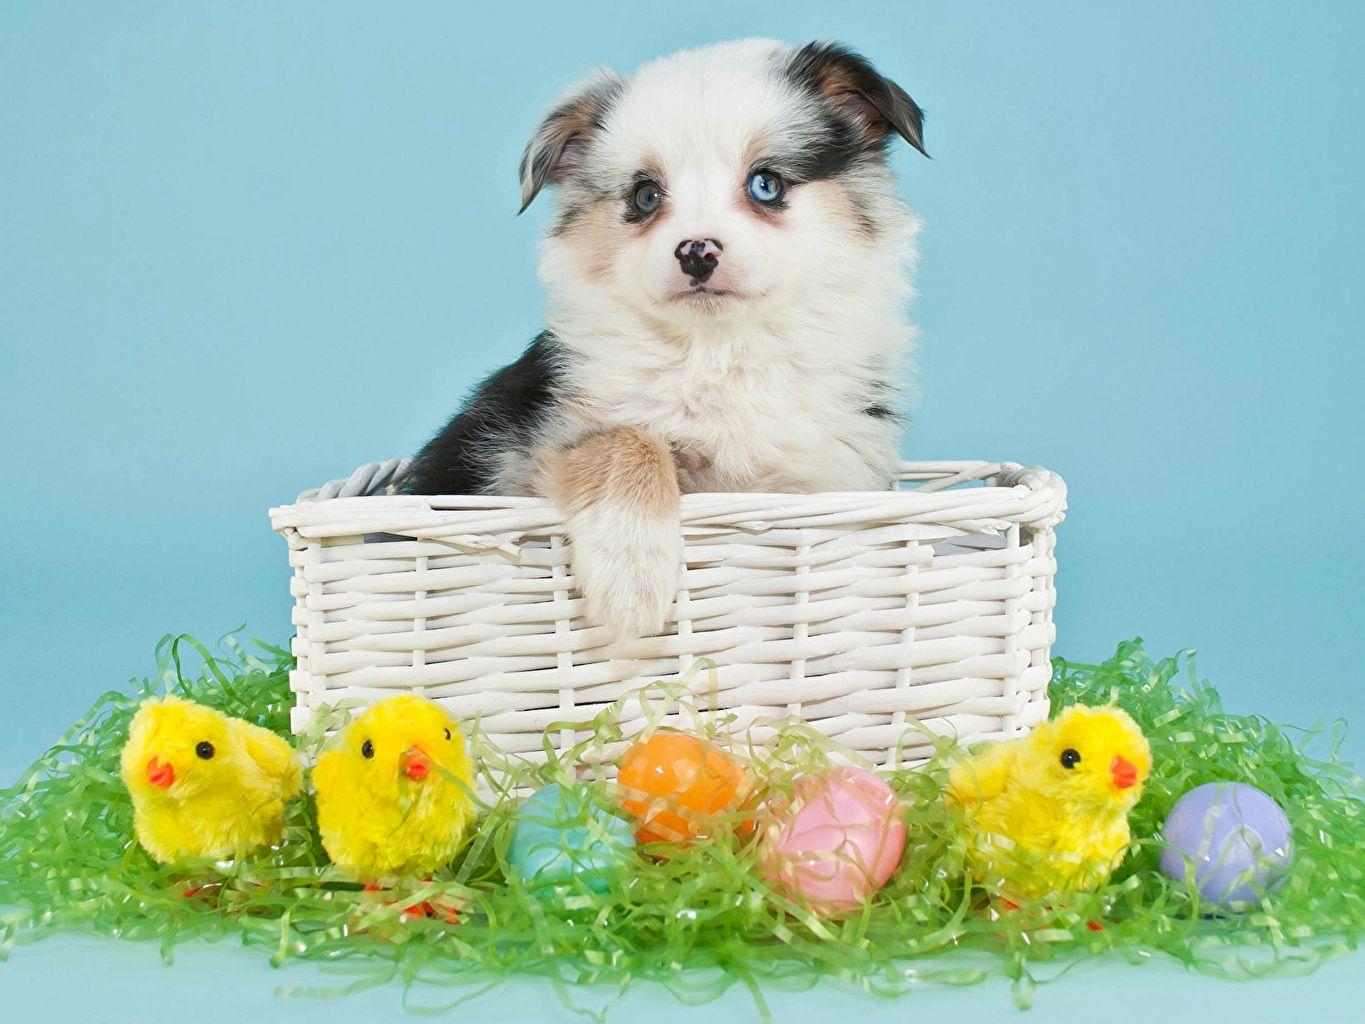 Image Easter Puppy Dogs Chicks Eggs Wicker basket Animals Holidays